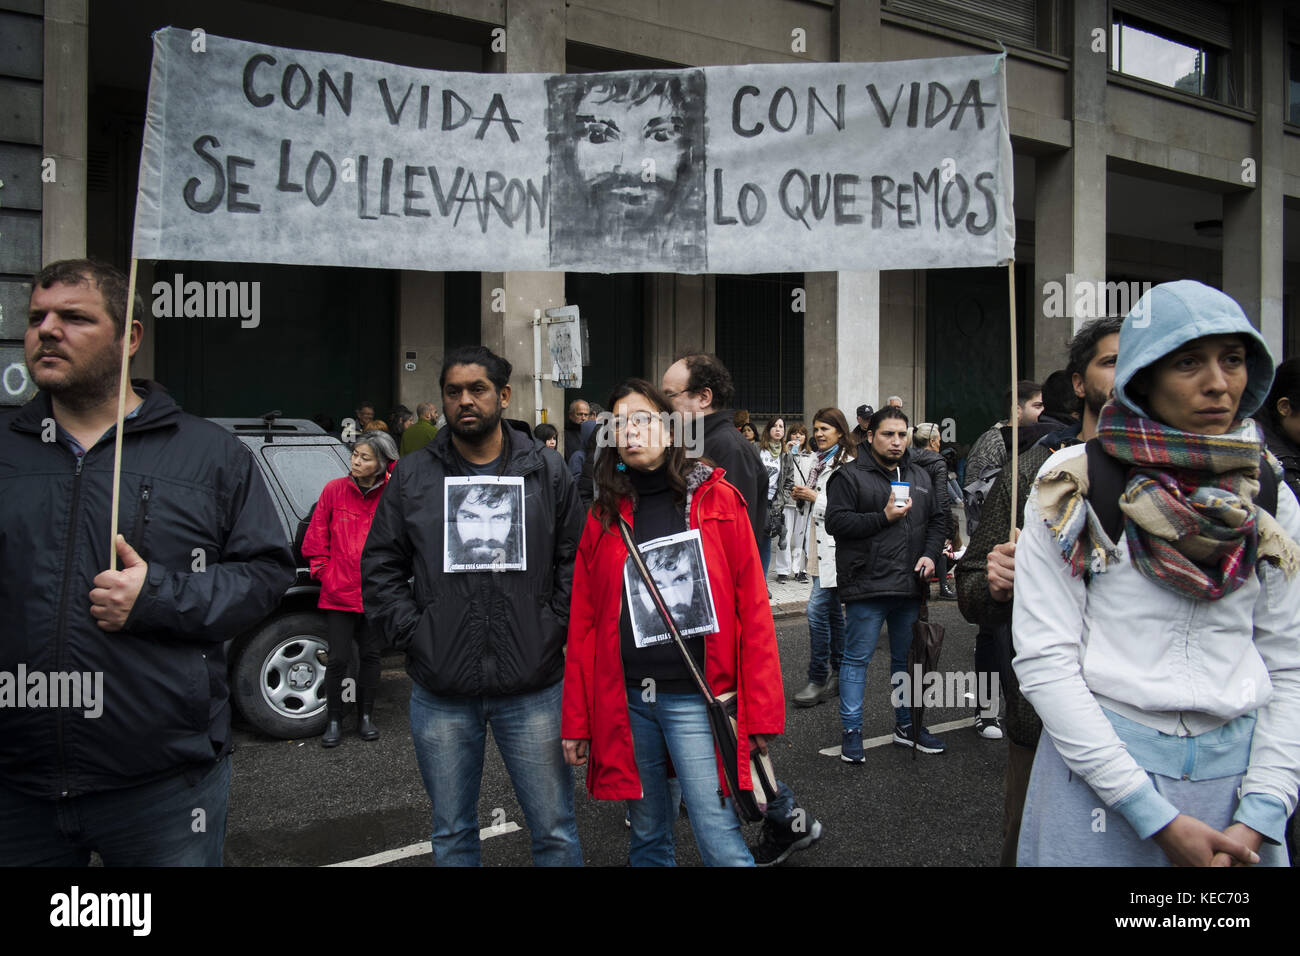 Federal Capital, Buenos Aires, Argentina. 16th Sep, 2017. Demonstrators are seen holding a banner to protest against the disappearance of Santiago Maldonado since 1 August 2017.Despite the rain, thousands of protesters gathered on Sunday in Plaza de Mayo hosted by the relatives and friends of Santiago Maldonado two months after his disappearance, after he was reportedly surrendering to Argentinian police guards during a raid on a camp of Mapuche protesters in Patagonia, south of Argentina. Various protests were seen in several other cities in Argentina, and abroad such as London, Paris, Stock Photo